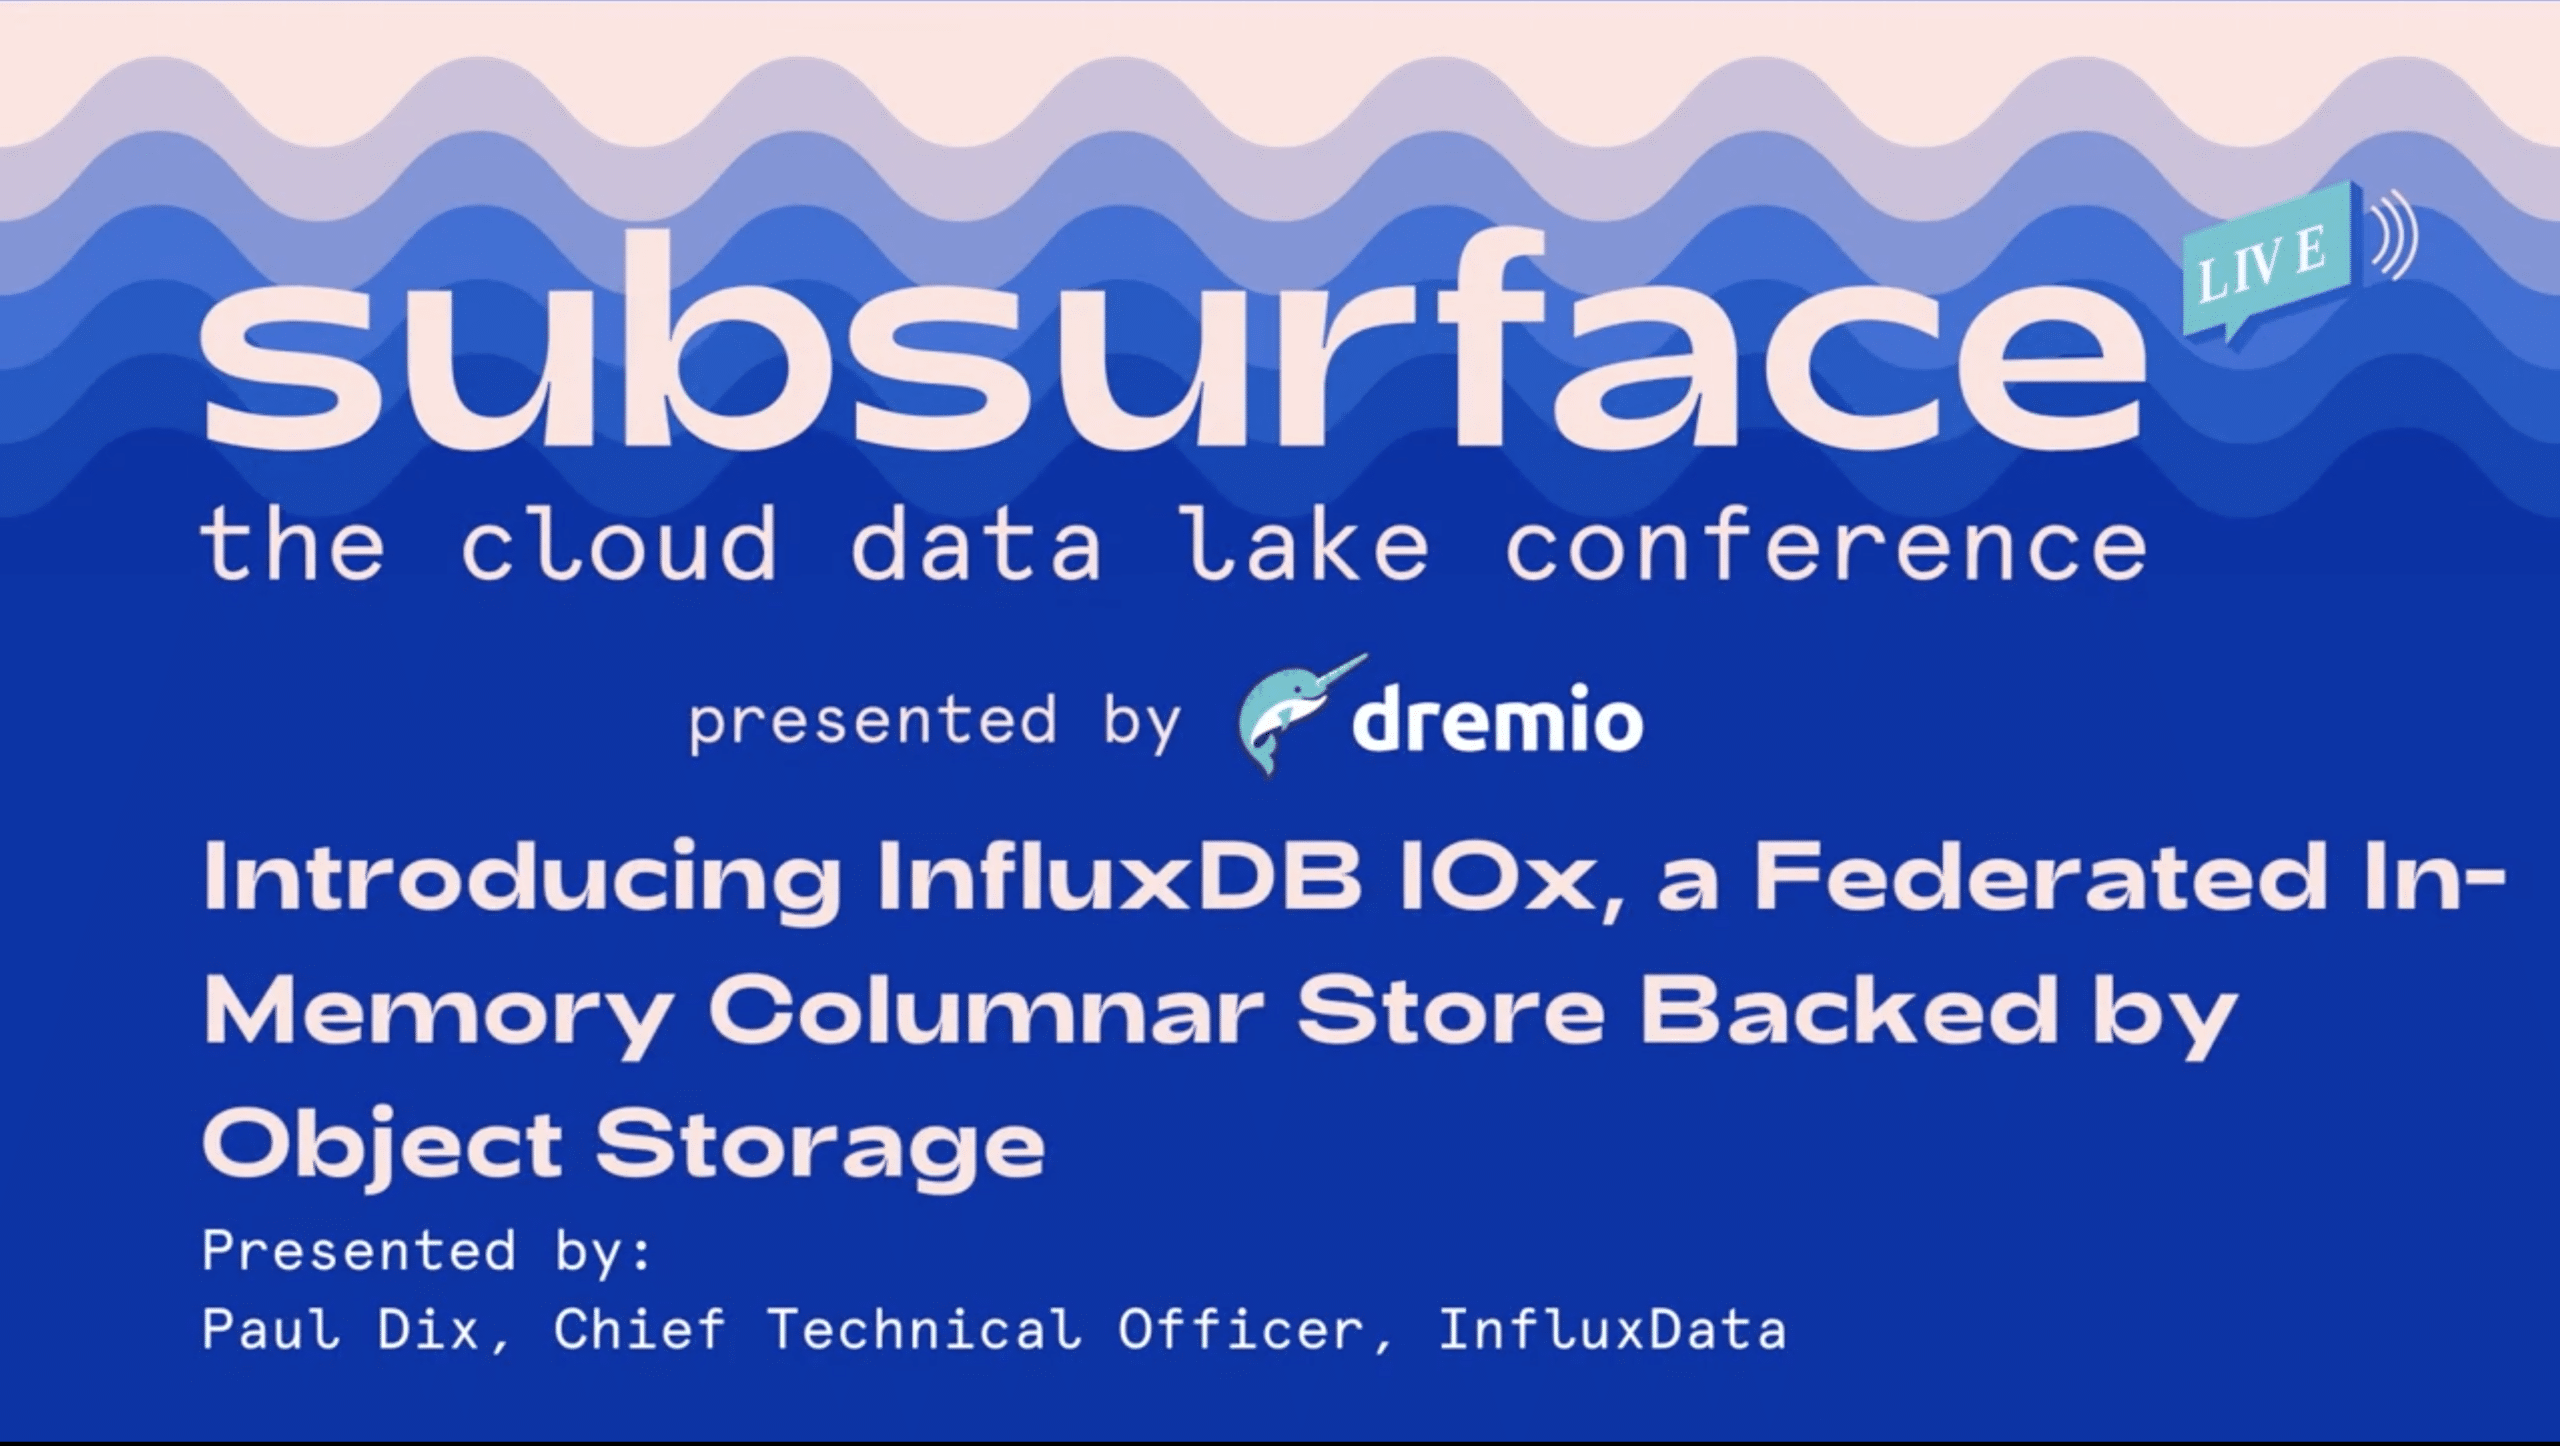 Introducing InfluxDB IOx, a Federated In-Memory Columnar Store Backed by Object Storage